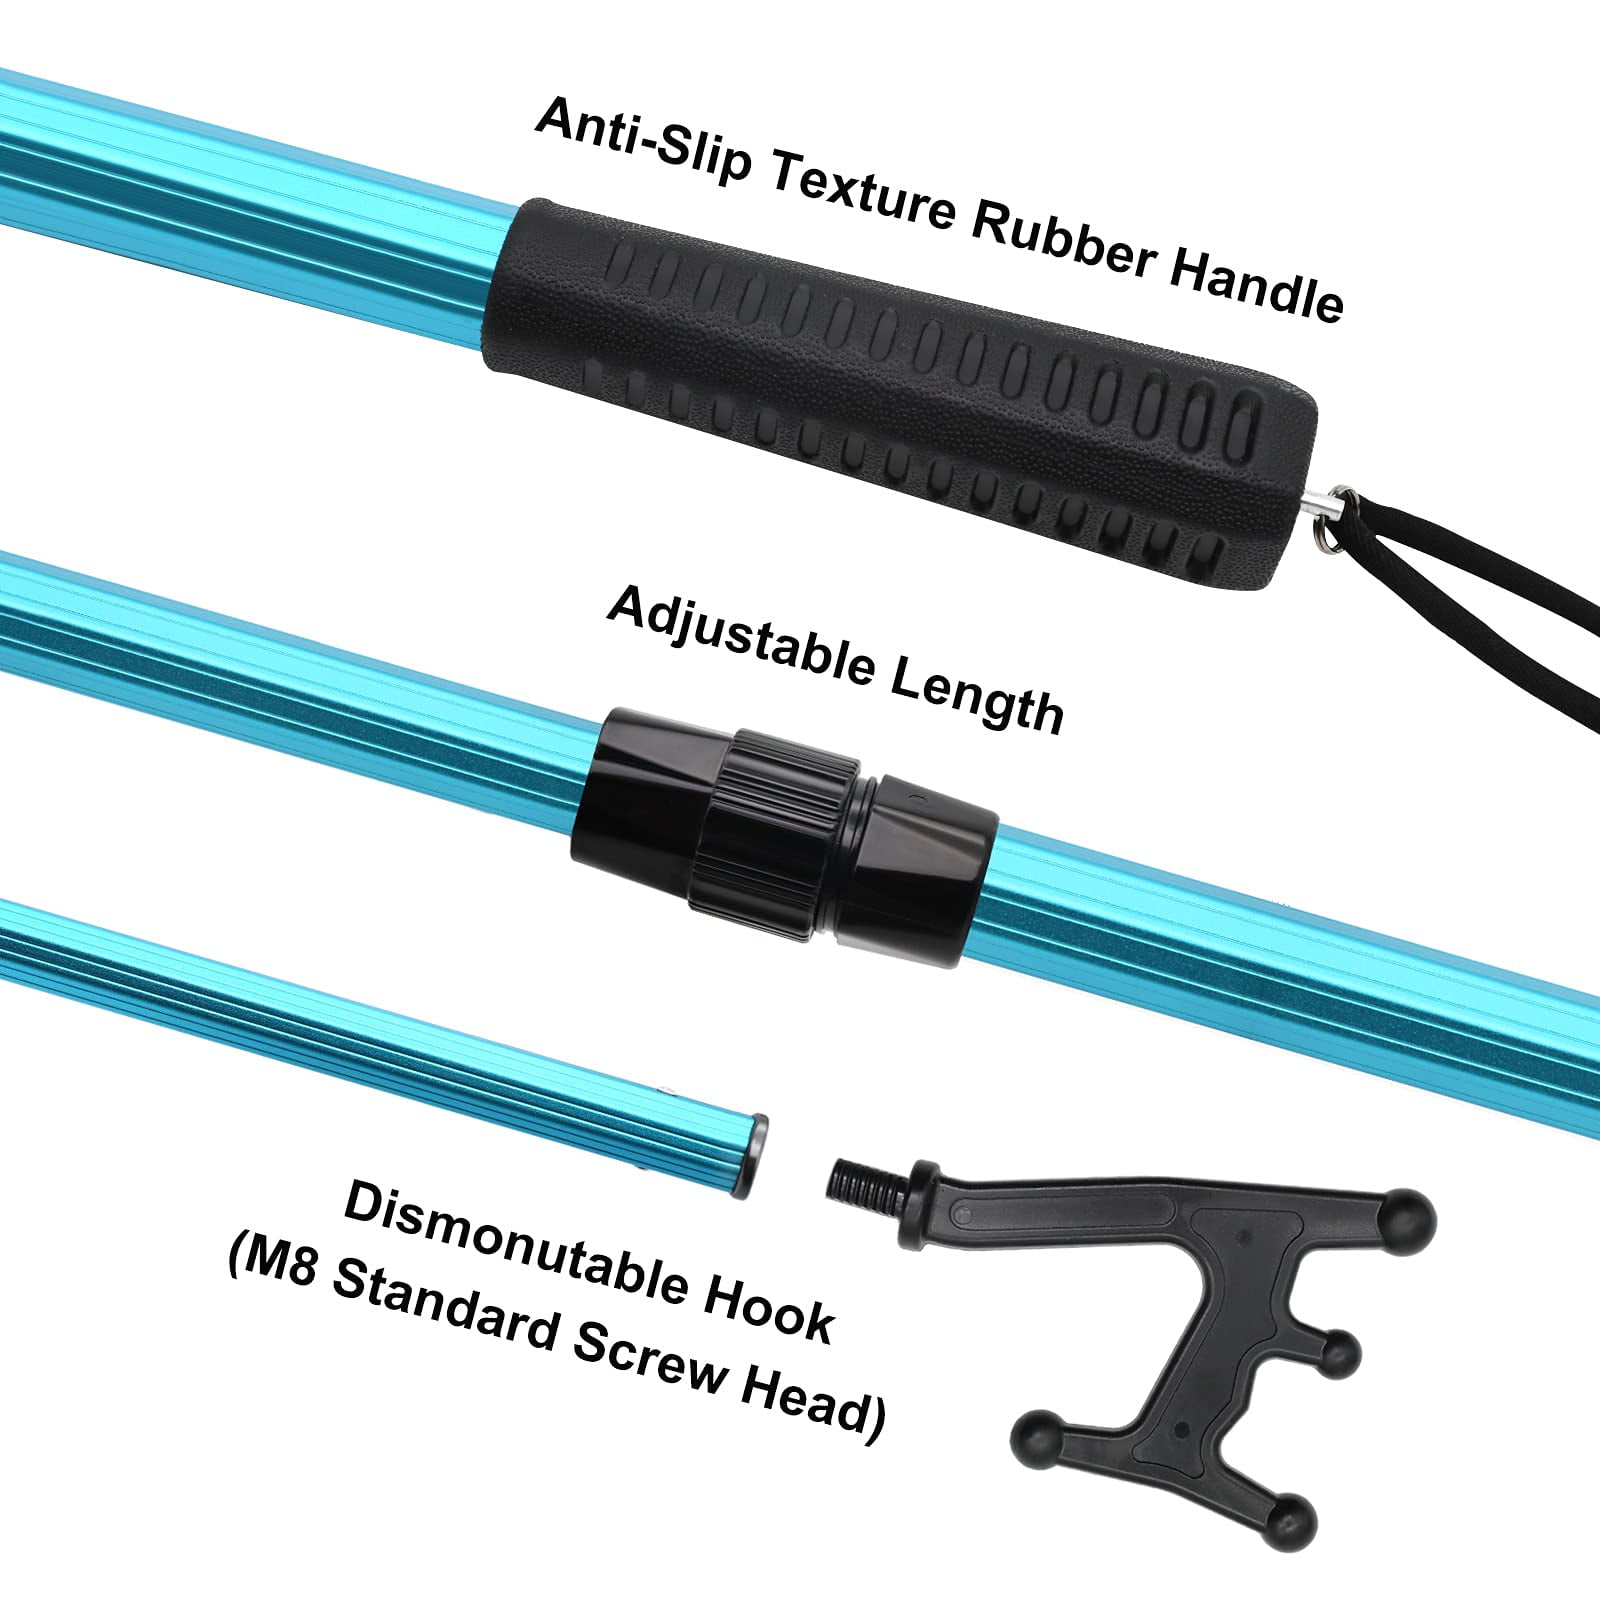 SAN LIKE Telescoping Boat Hooks Adjustable Boat Push Pole - Dock Pole  Floating,Durable,Rust-Resistant with Luminous Bead Push Pole for Docking  Extends from 2Ft to 4.72Ft & Blue 